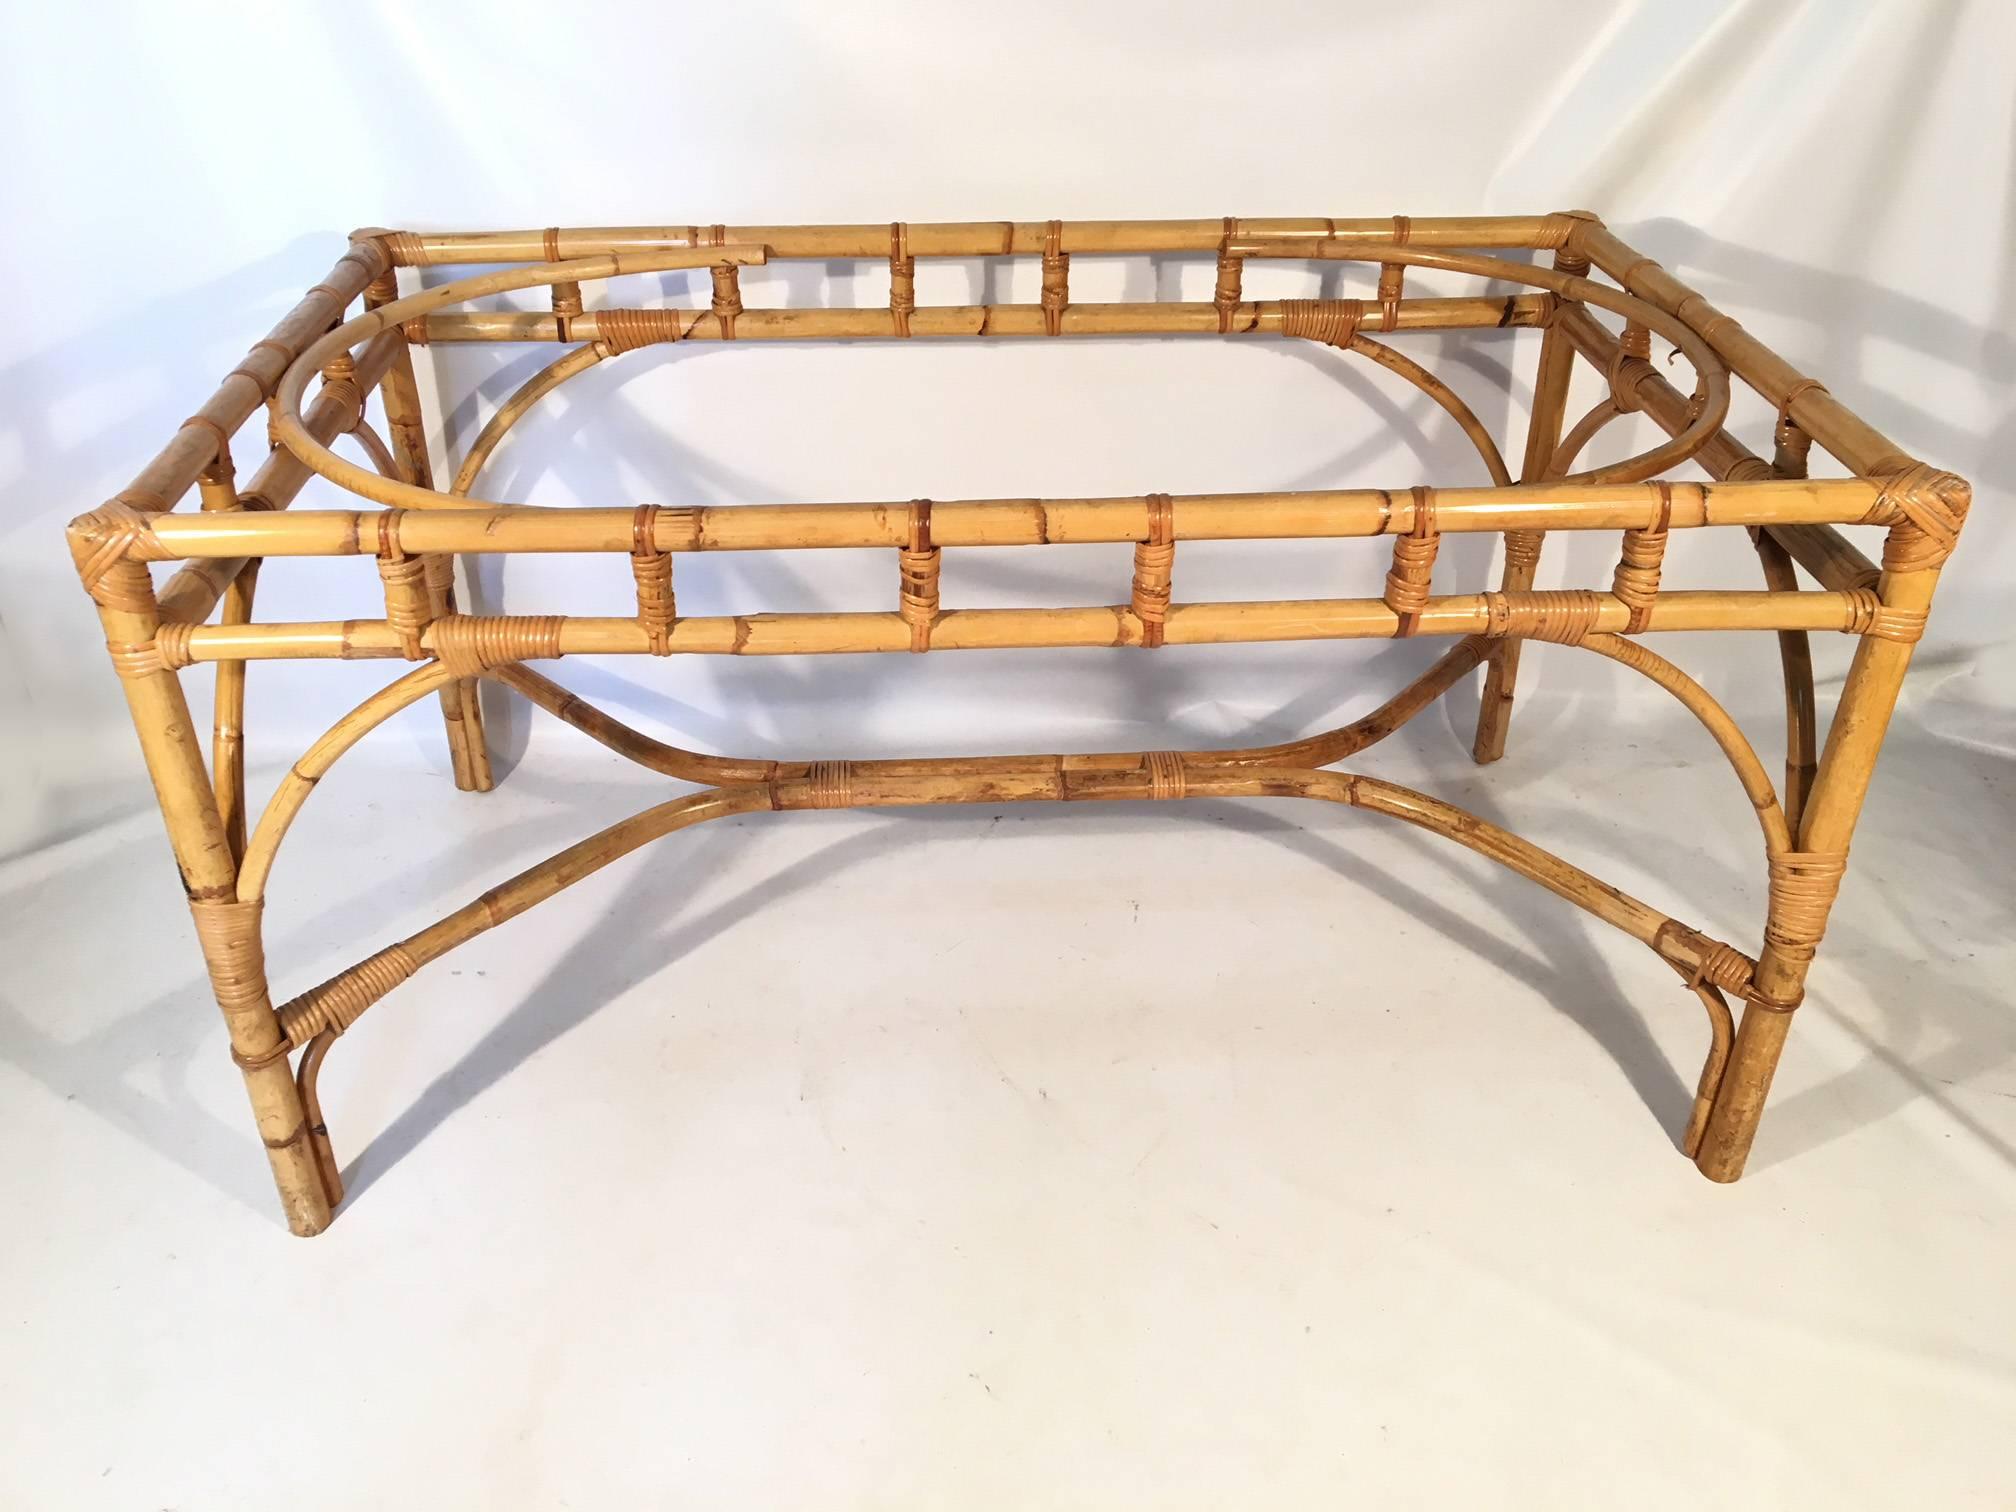 Vintage mid century bamboo dining table base ready for your glass top. Excellent vintage condition both structural and cosmetic.